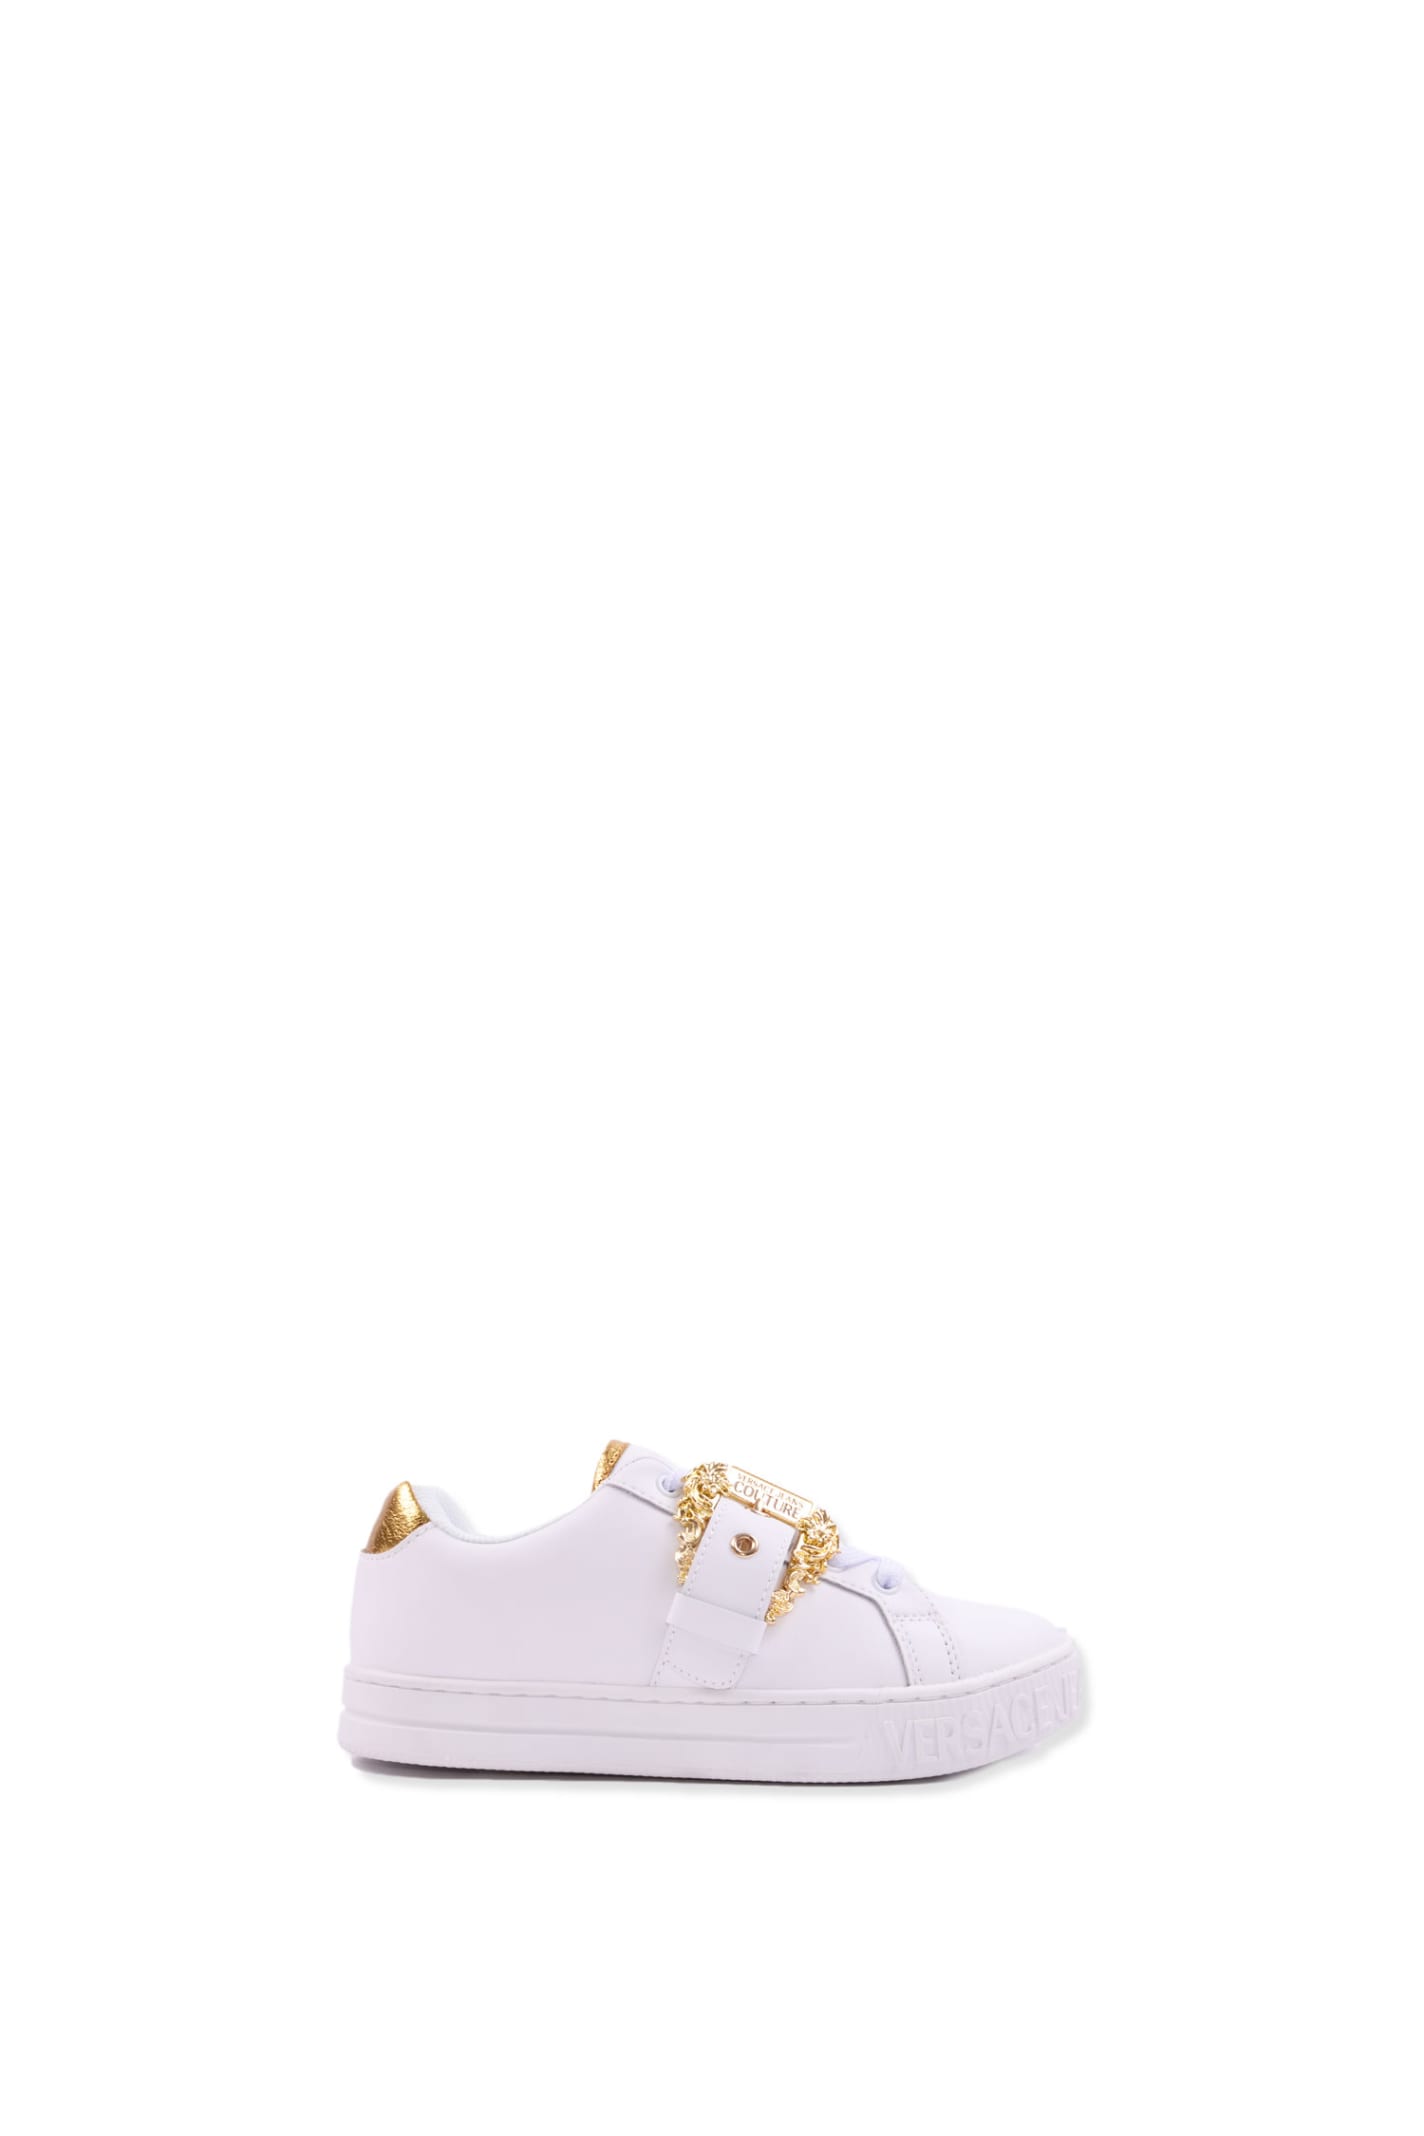 Versace Jeans Couture Baroque Buckle Sneakers